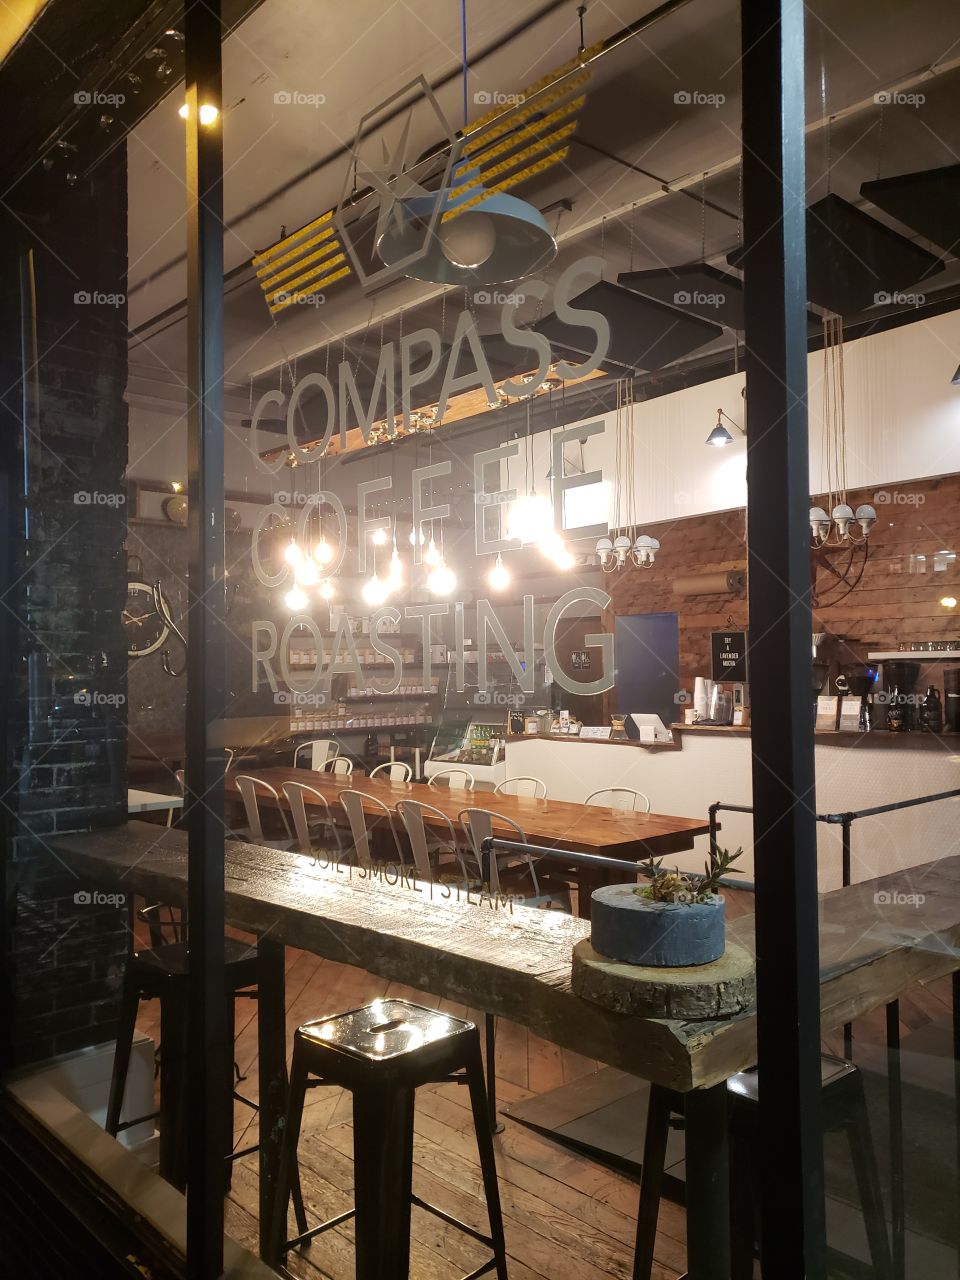 Compass Coffee cafe at nighttime